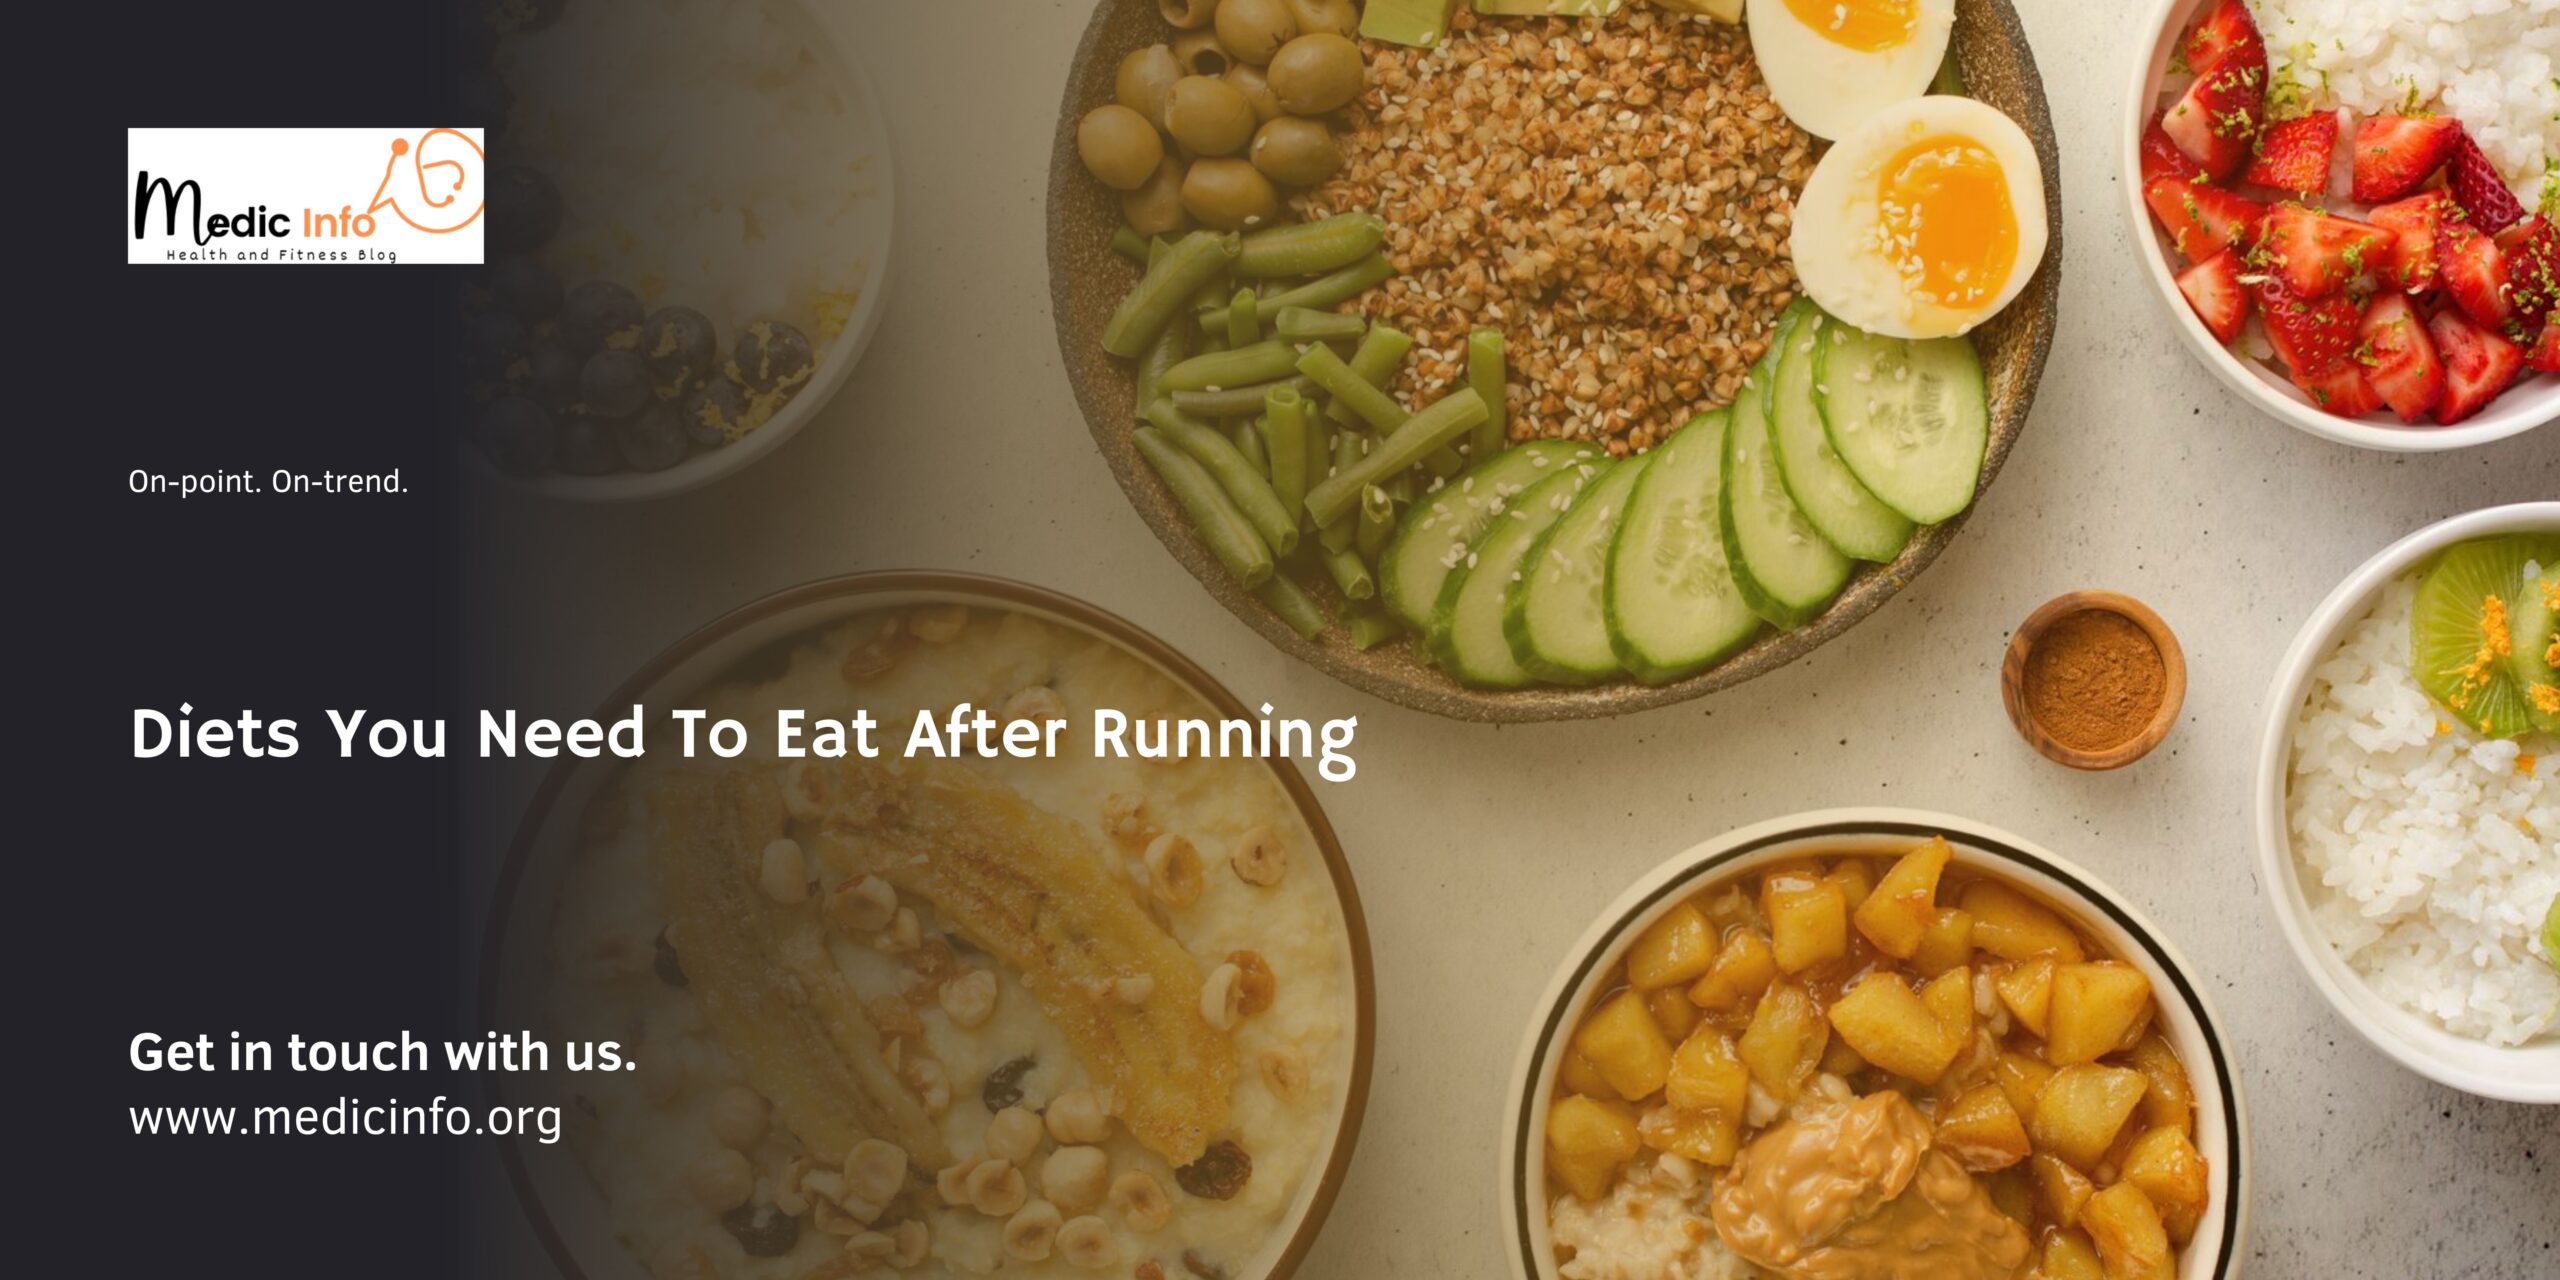 Diets You Need To Eat After Running